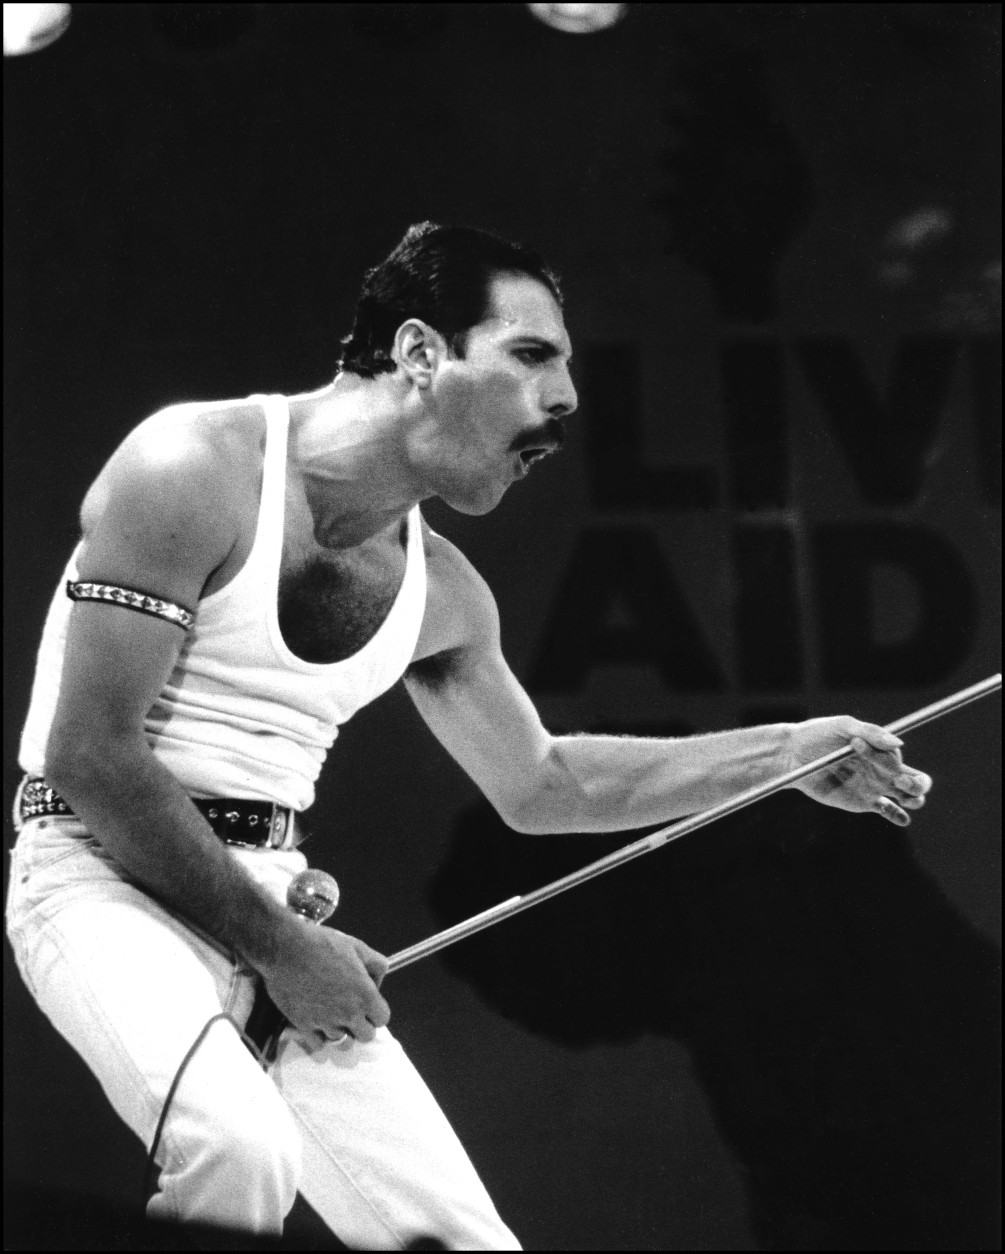 Freddy Mercury with Queen on stage at Live Aid on 13 July 1985 at Wembley Stadium, London.
(AP Photo/Mark Allan)